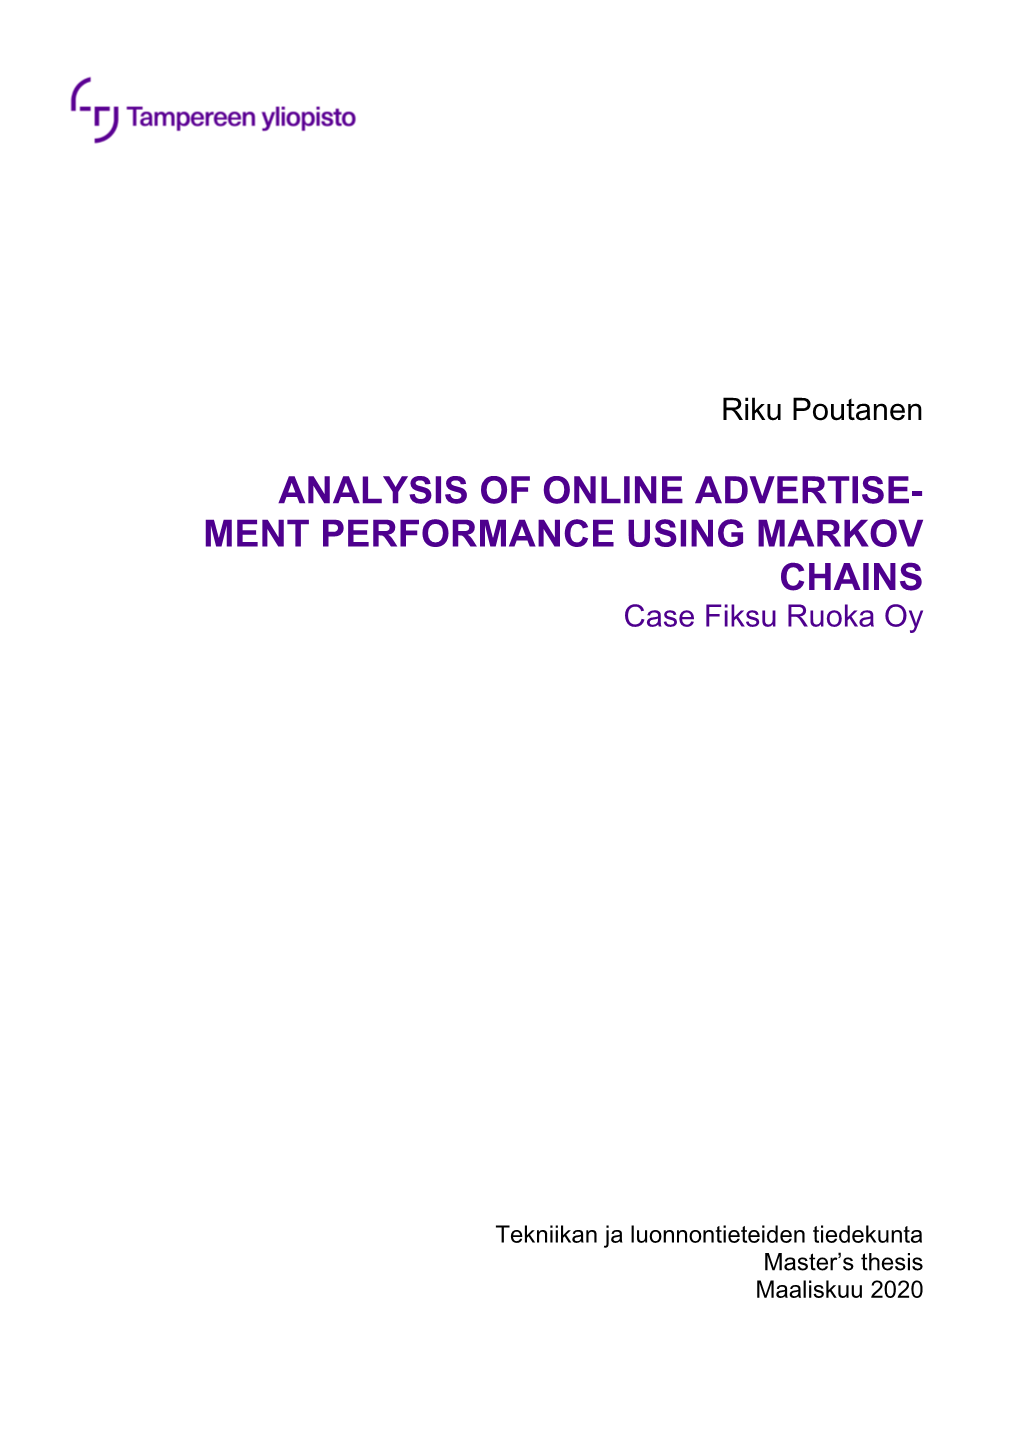 Analysis of Online Advertise-Ment Performance Using Markov Chains